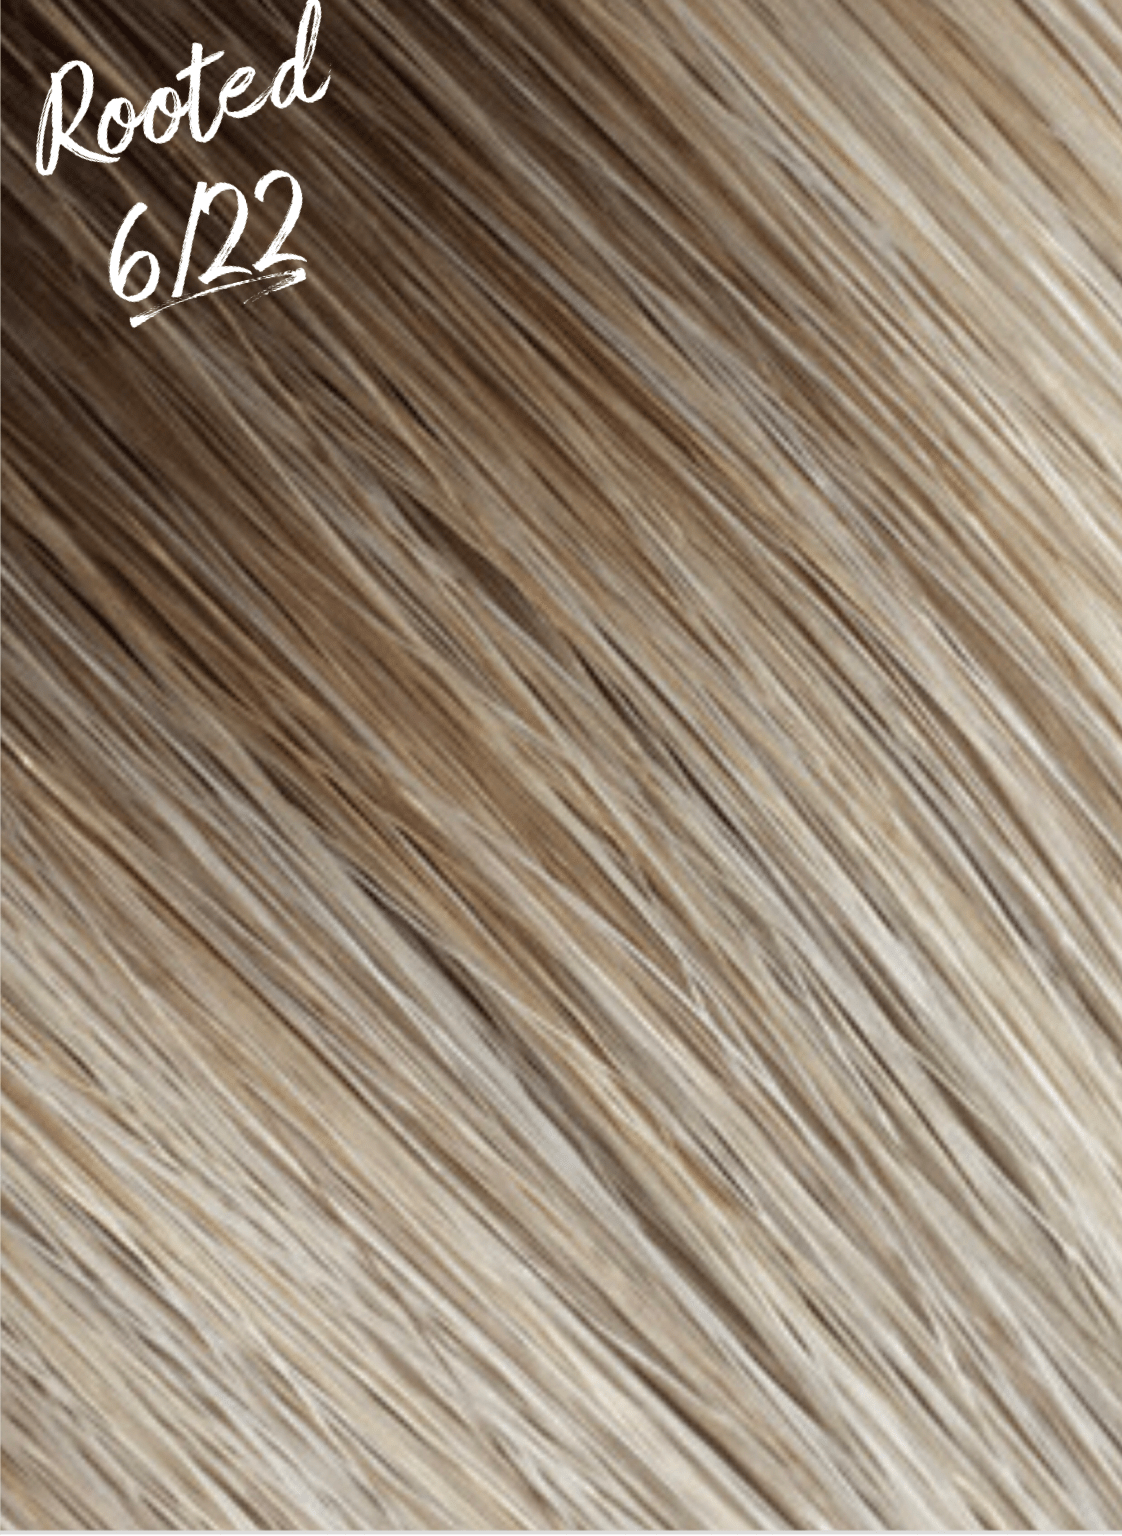 Luxury Professional Hand Tied Wefts.